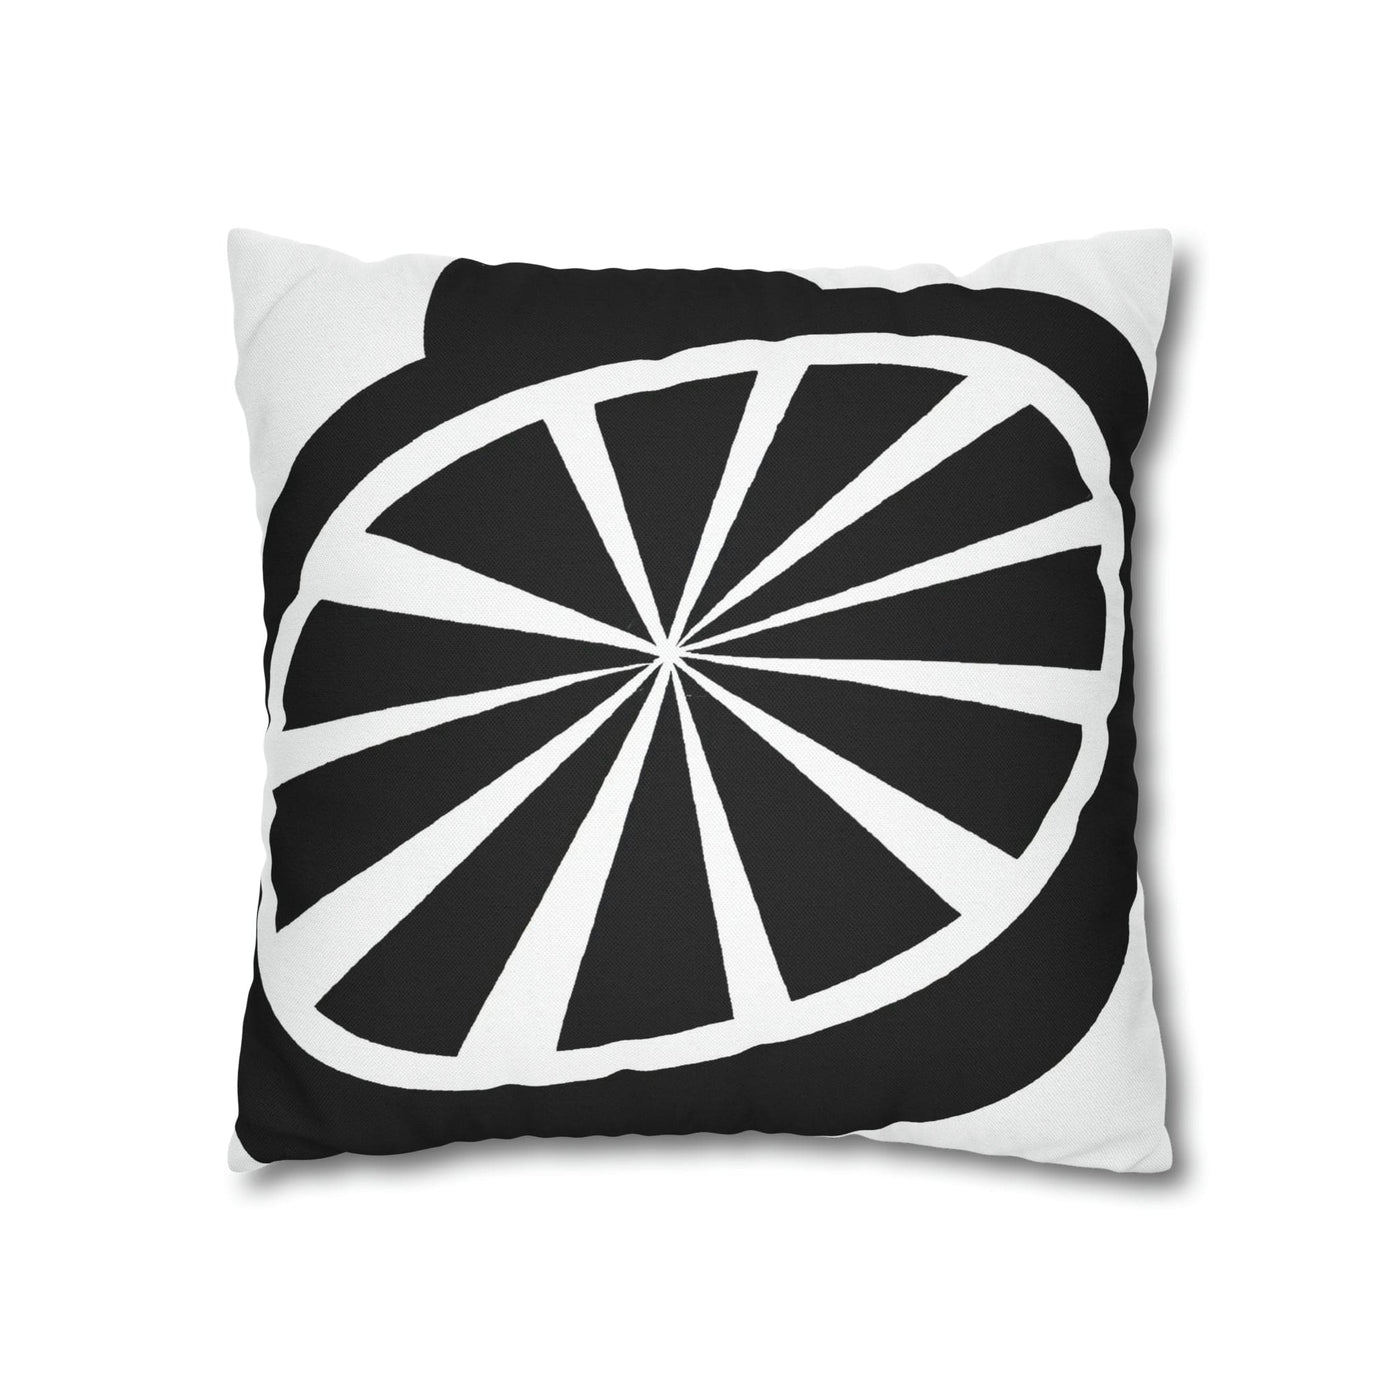 Decorative Throw Pillow Covers With Zipper - Set Of 2 Black And White Geometric